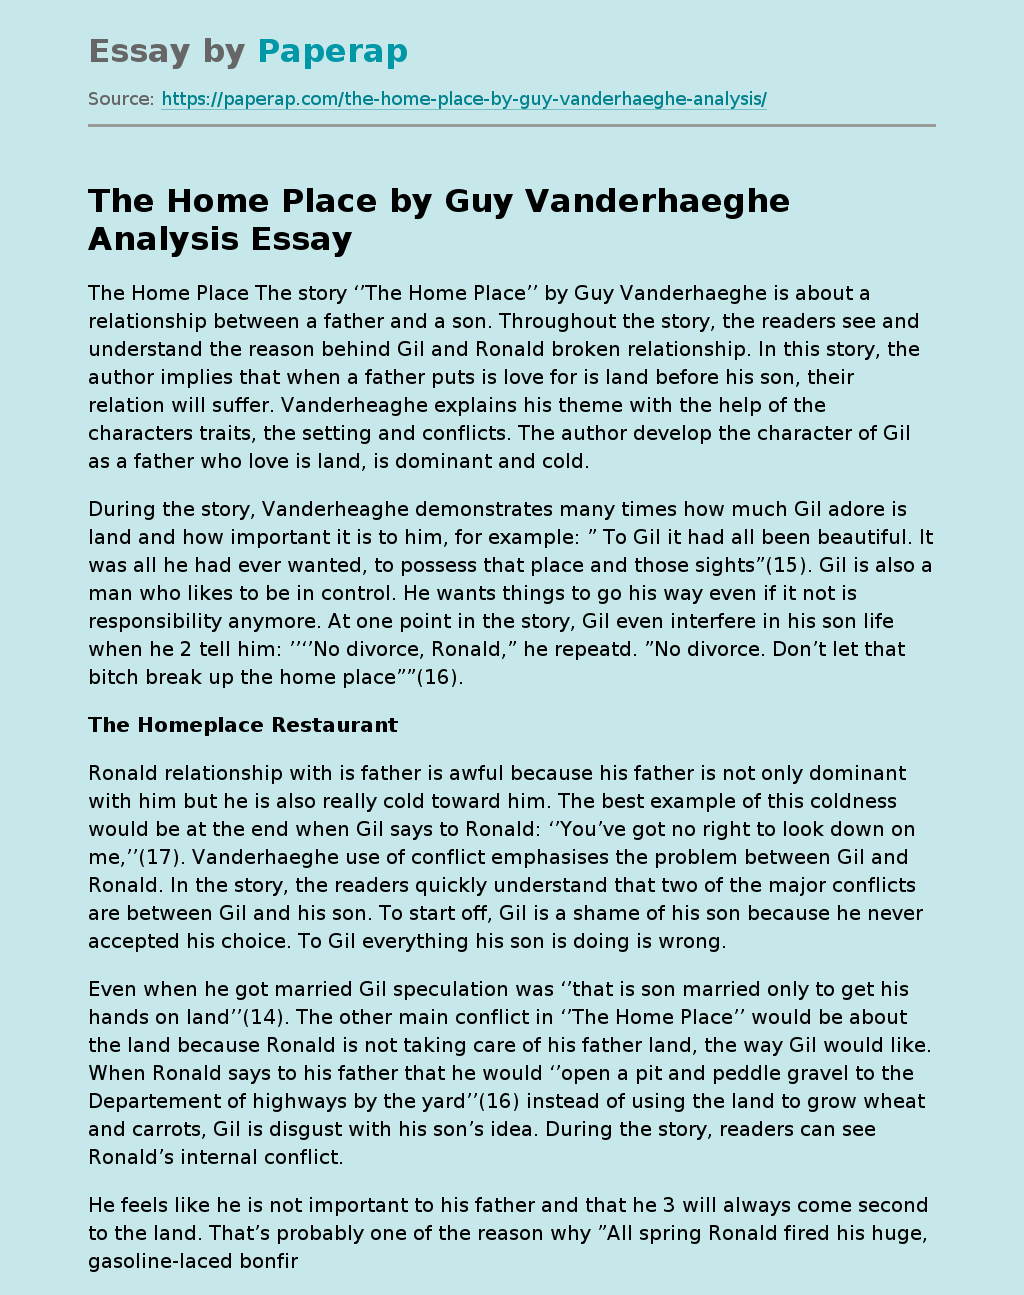 The Home Place by Guy Vanderhaeghe Analysis